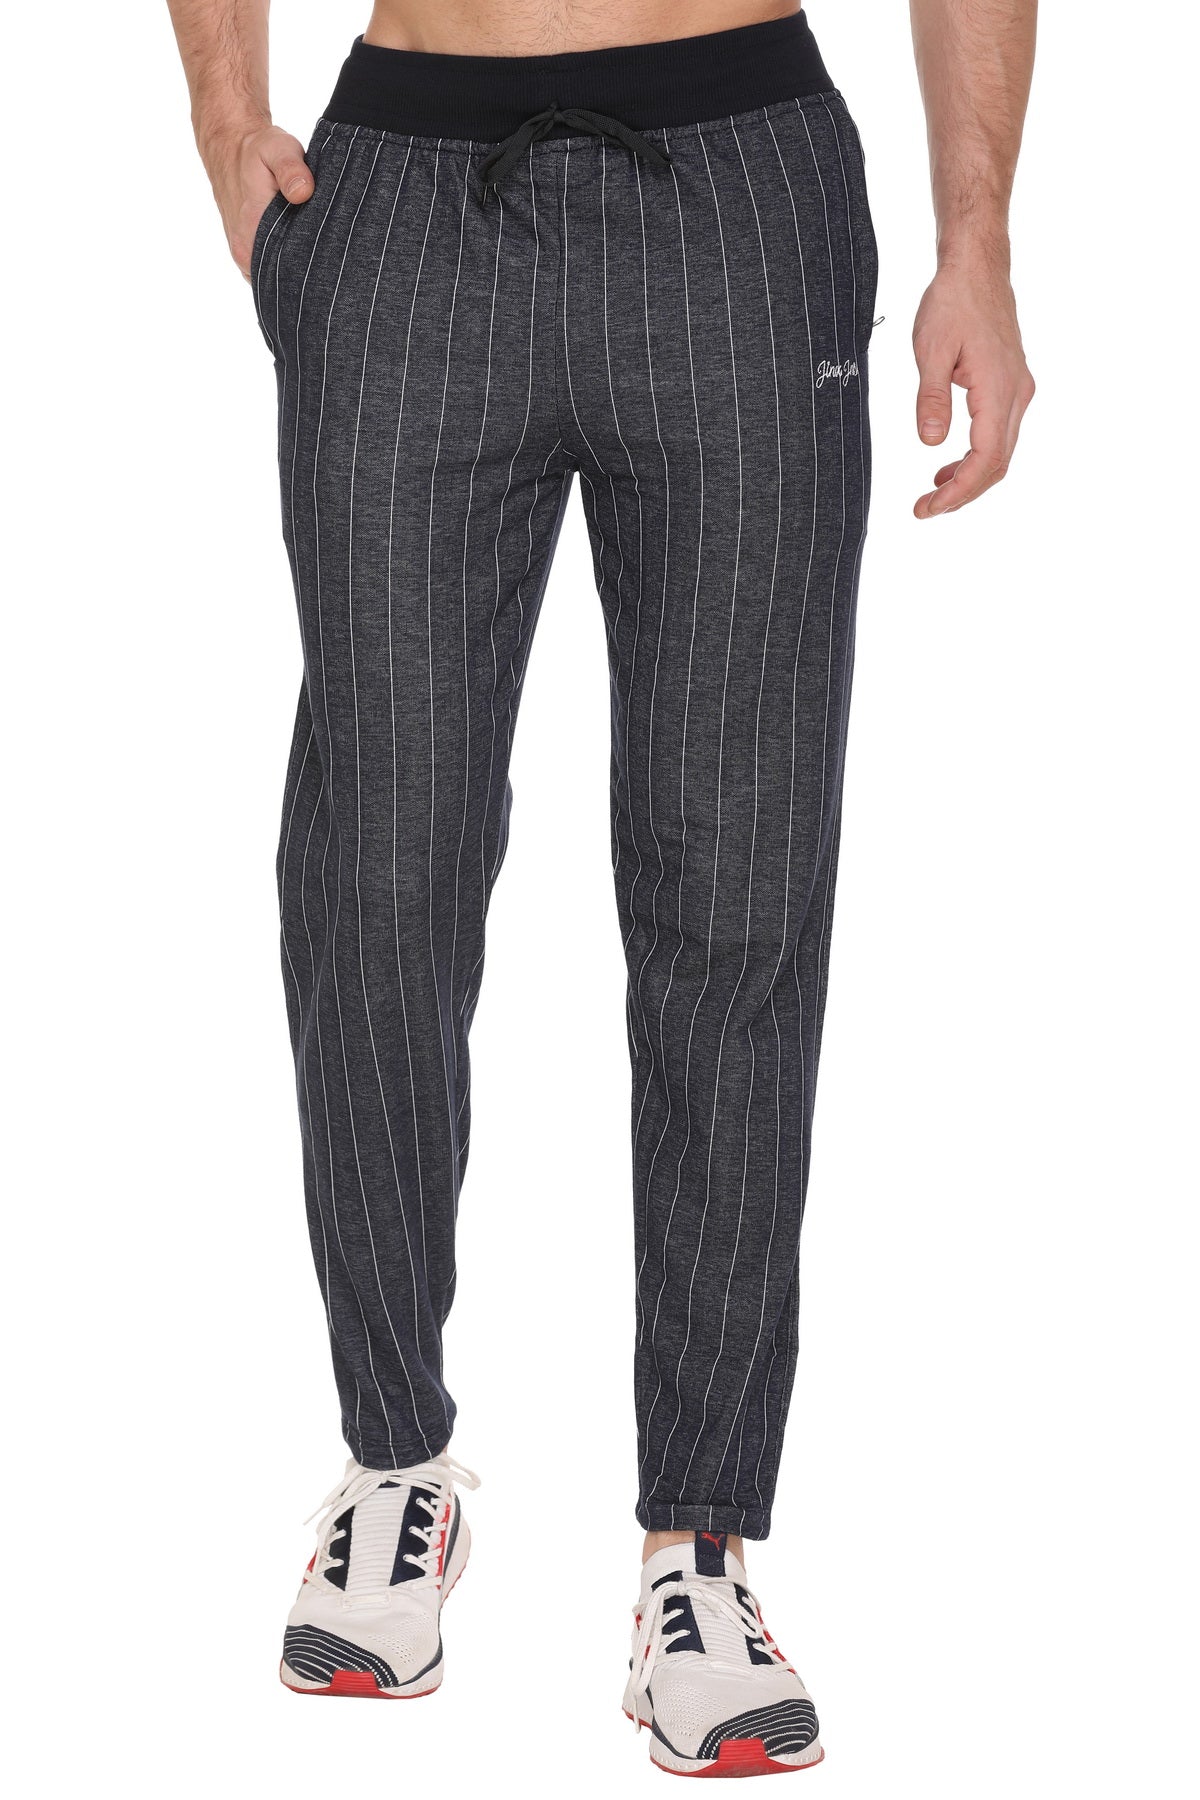 Buy night pants mens cotton in India @ Limeroad